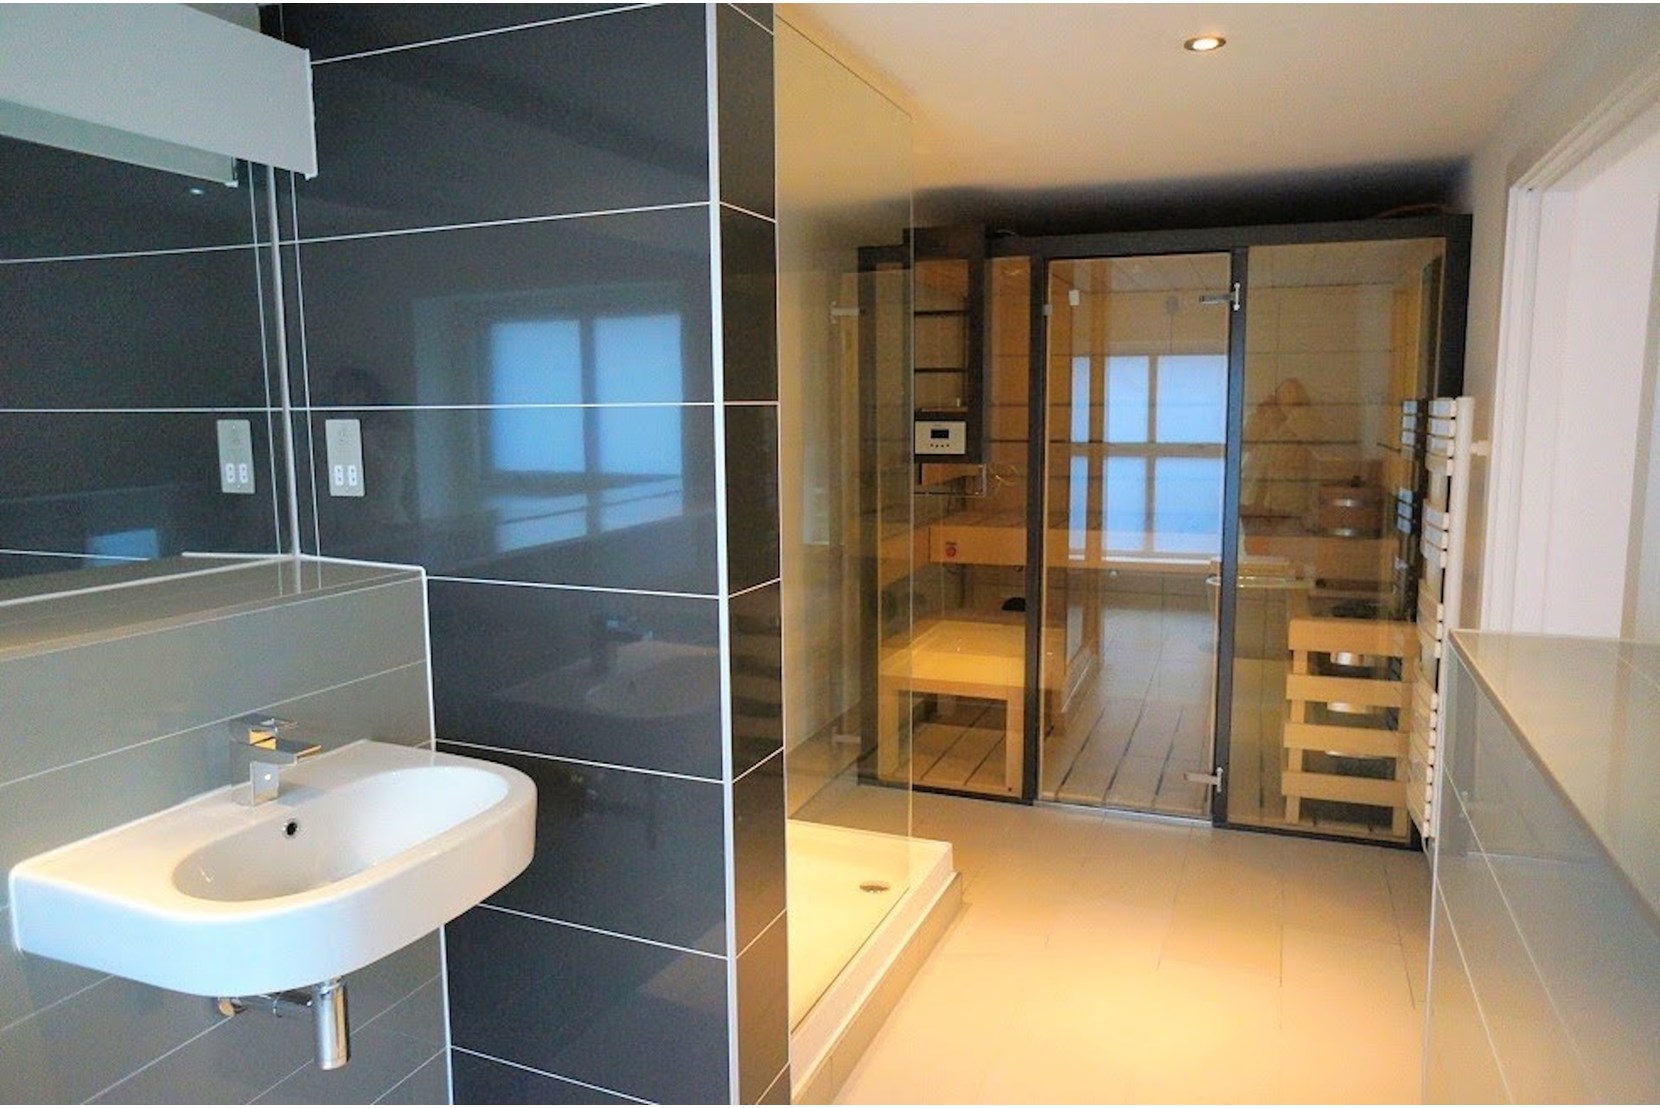 Apartments to Rent by Northern Group at Ice Plant, Manchester, M4, bathroom and sauna area